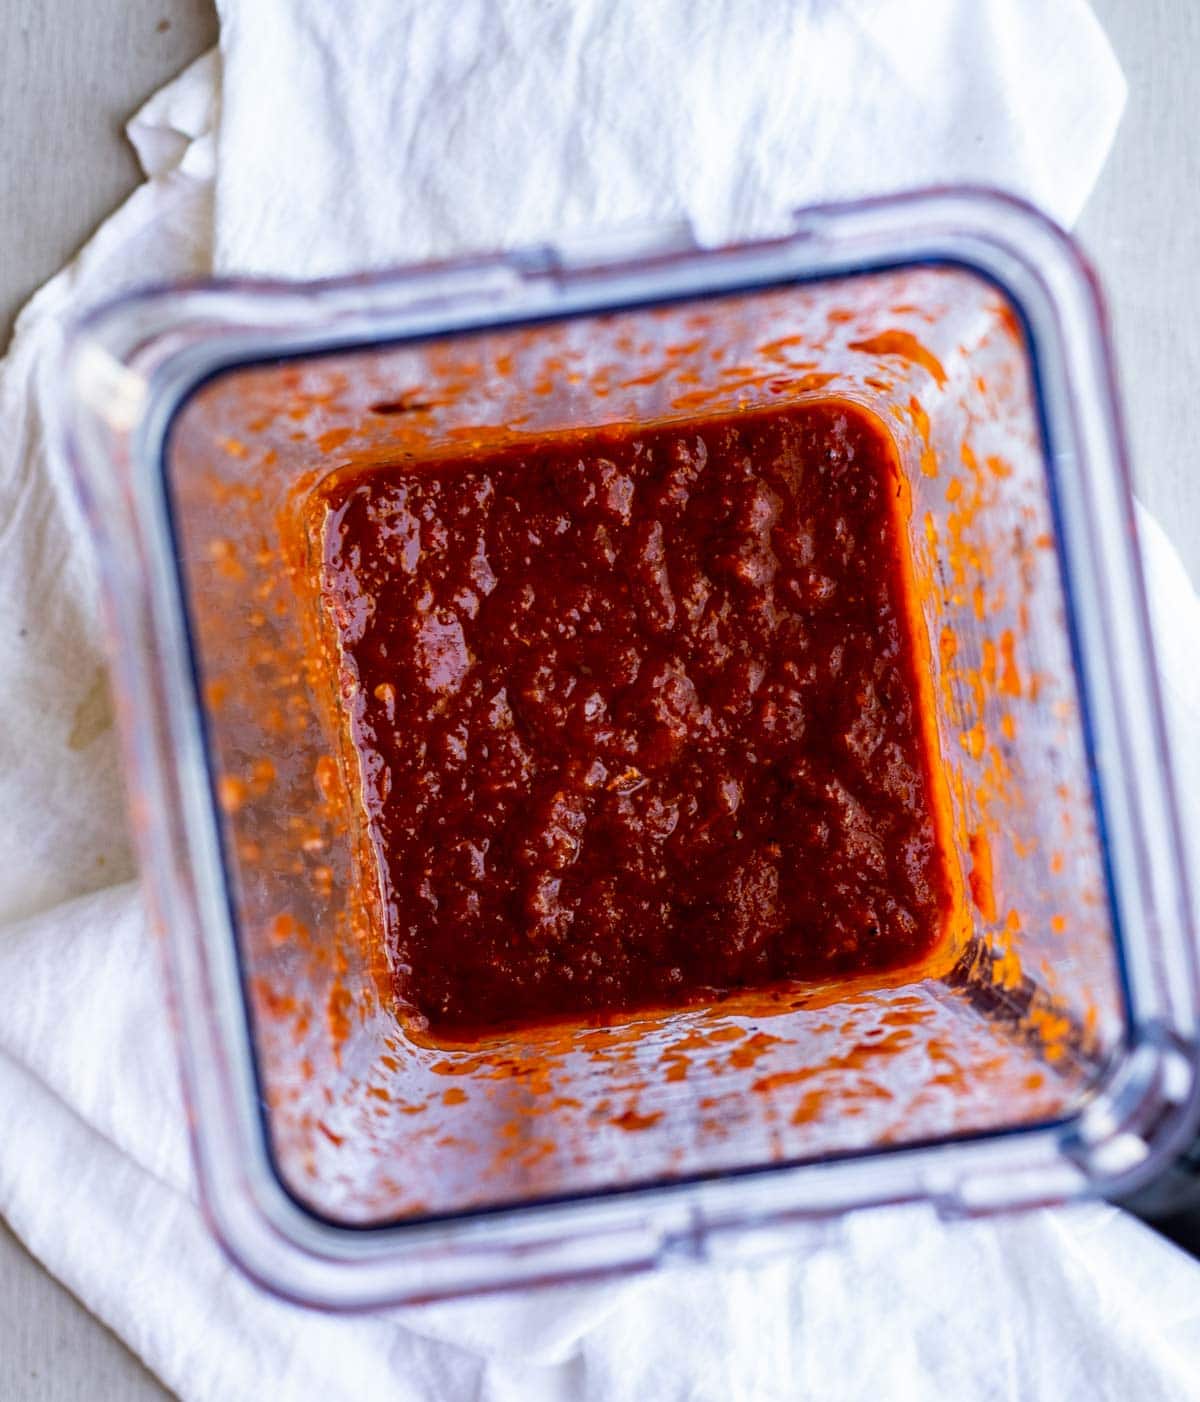 Overhead view of the red sauce blended together in the blender.